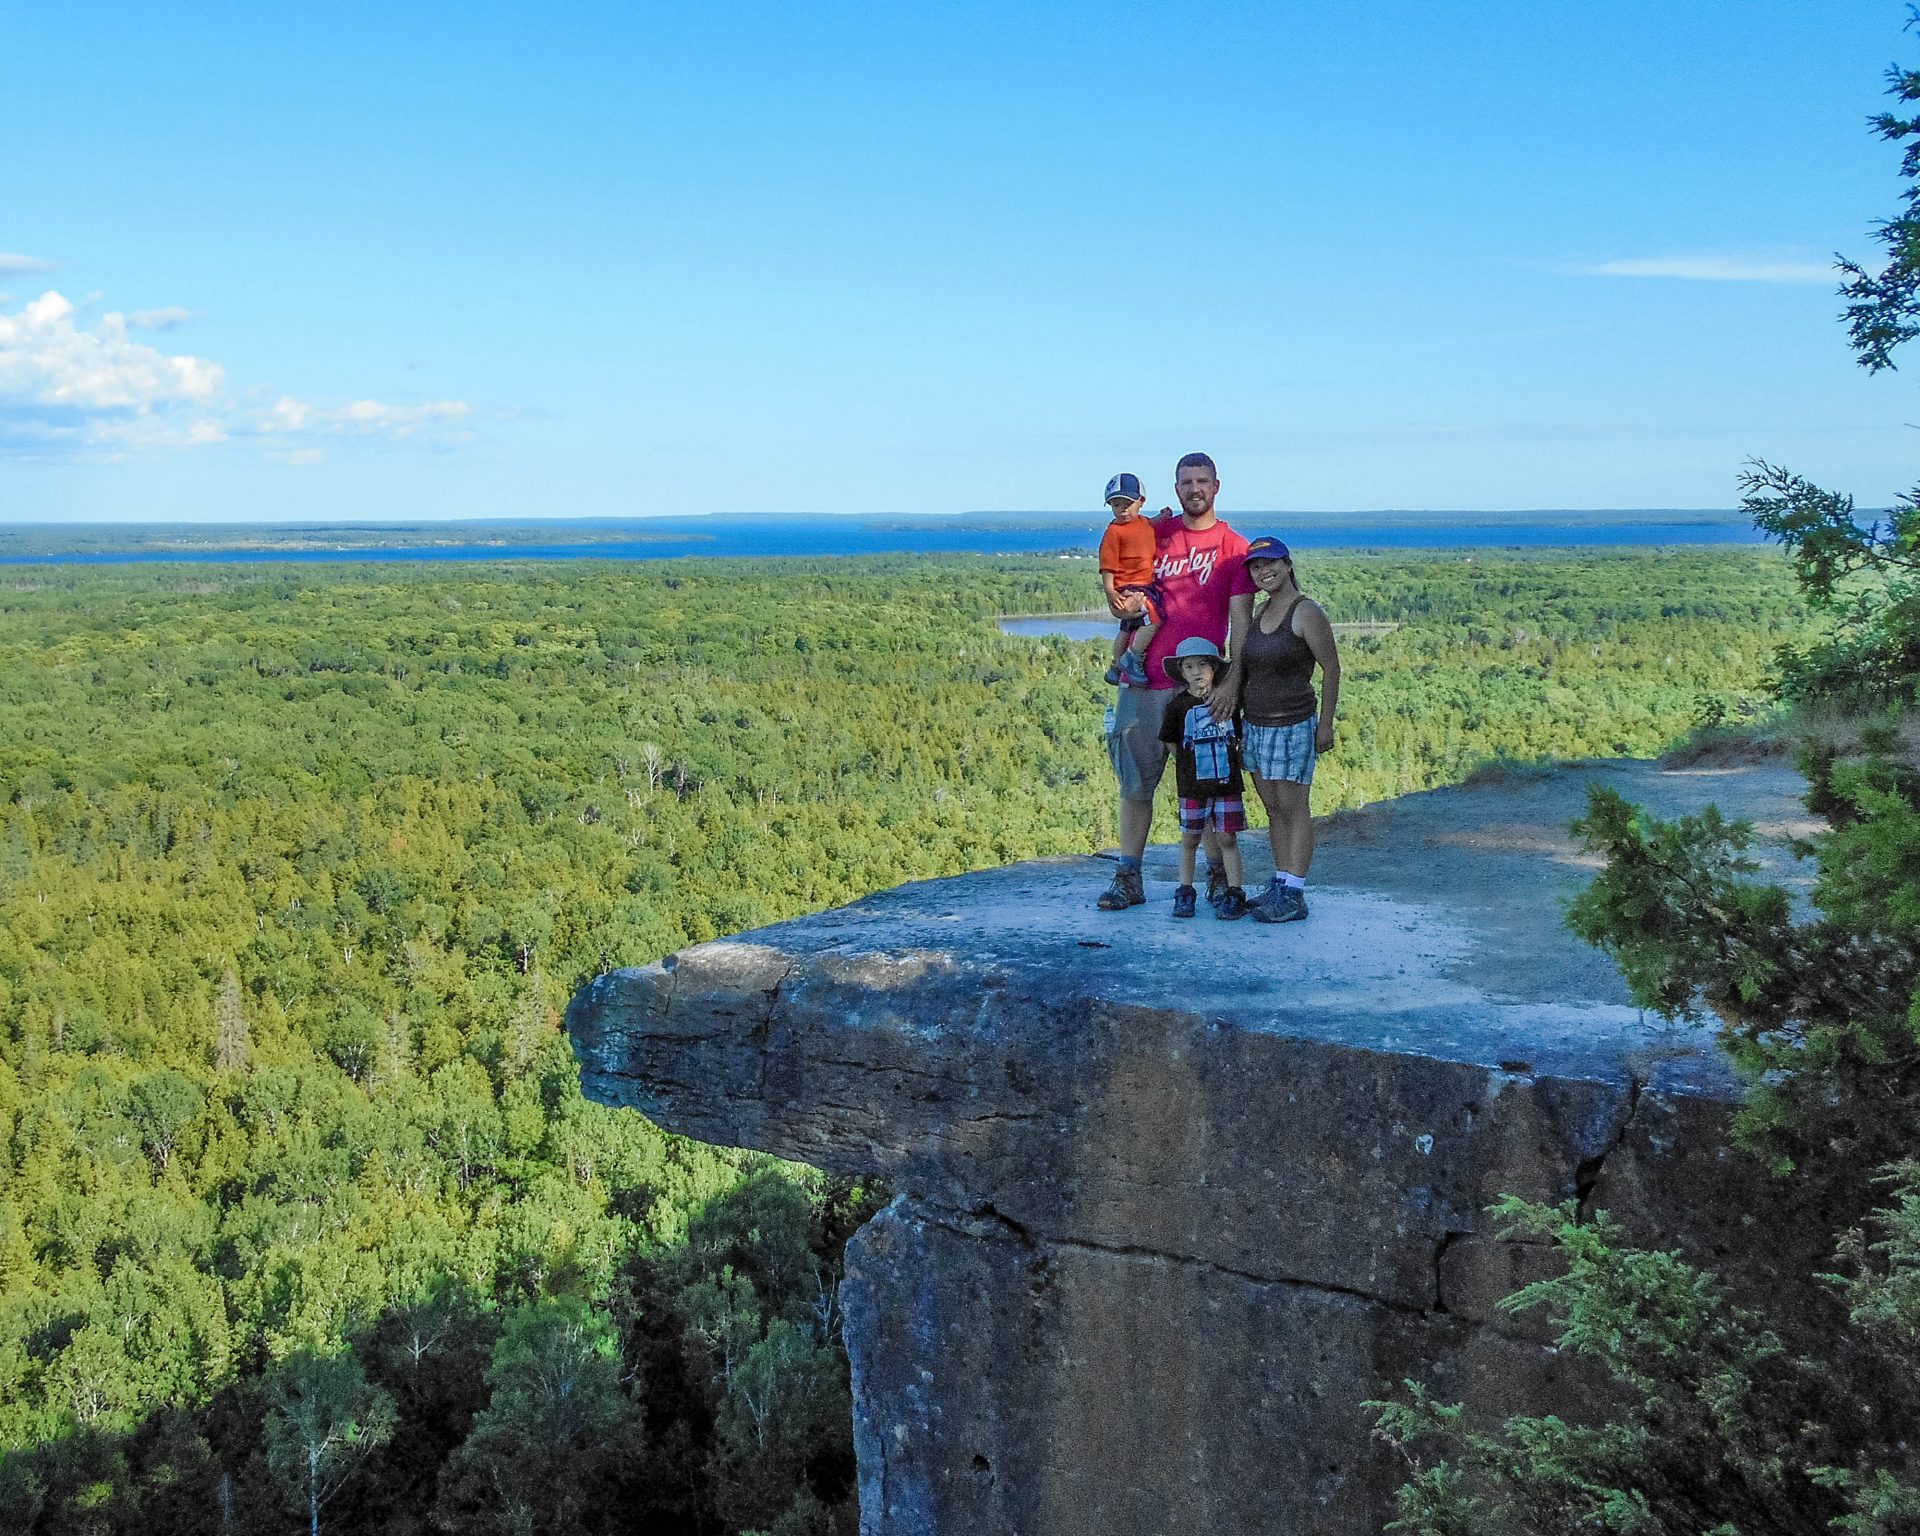 Family picture on the famous lookout at the Cup and Sauce Trail which is one of the Great Spirit Circle Trail Experiences on Manitoulin Island.